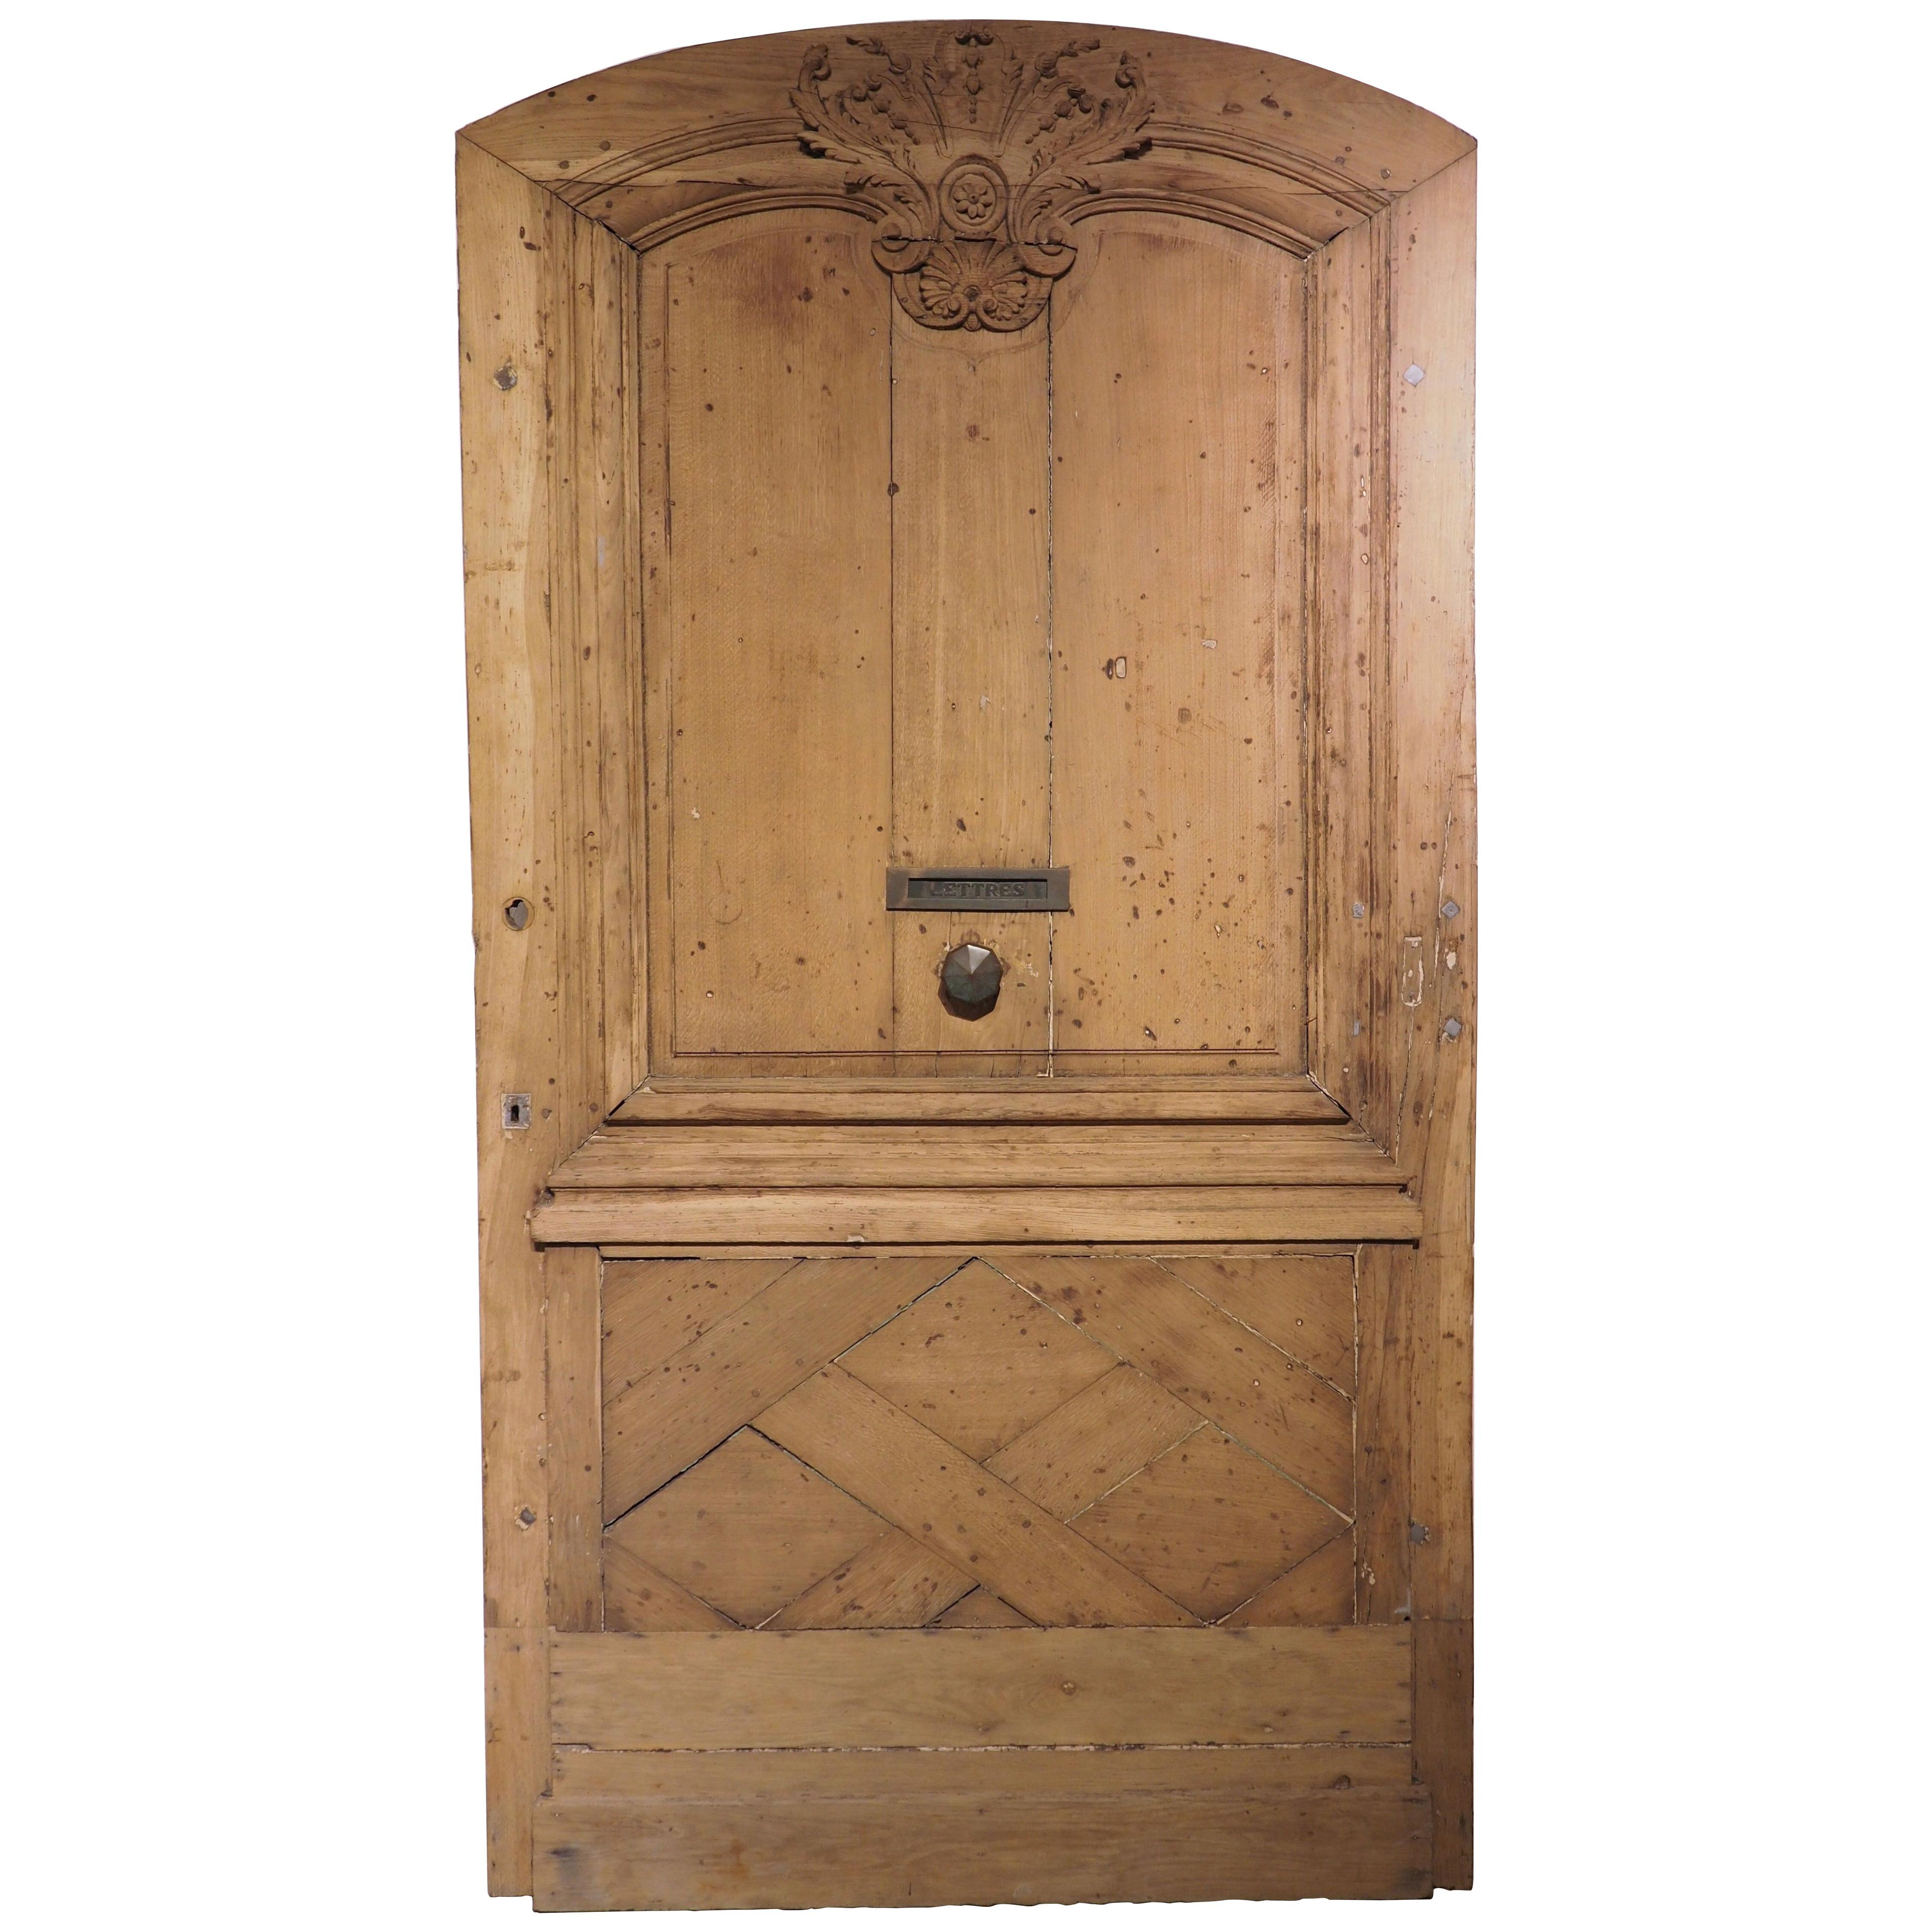 Antique Carved Oak Entry Door from France, Circa 1850